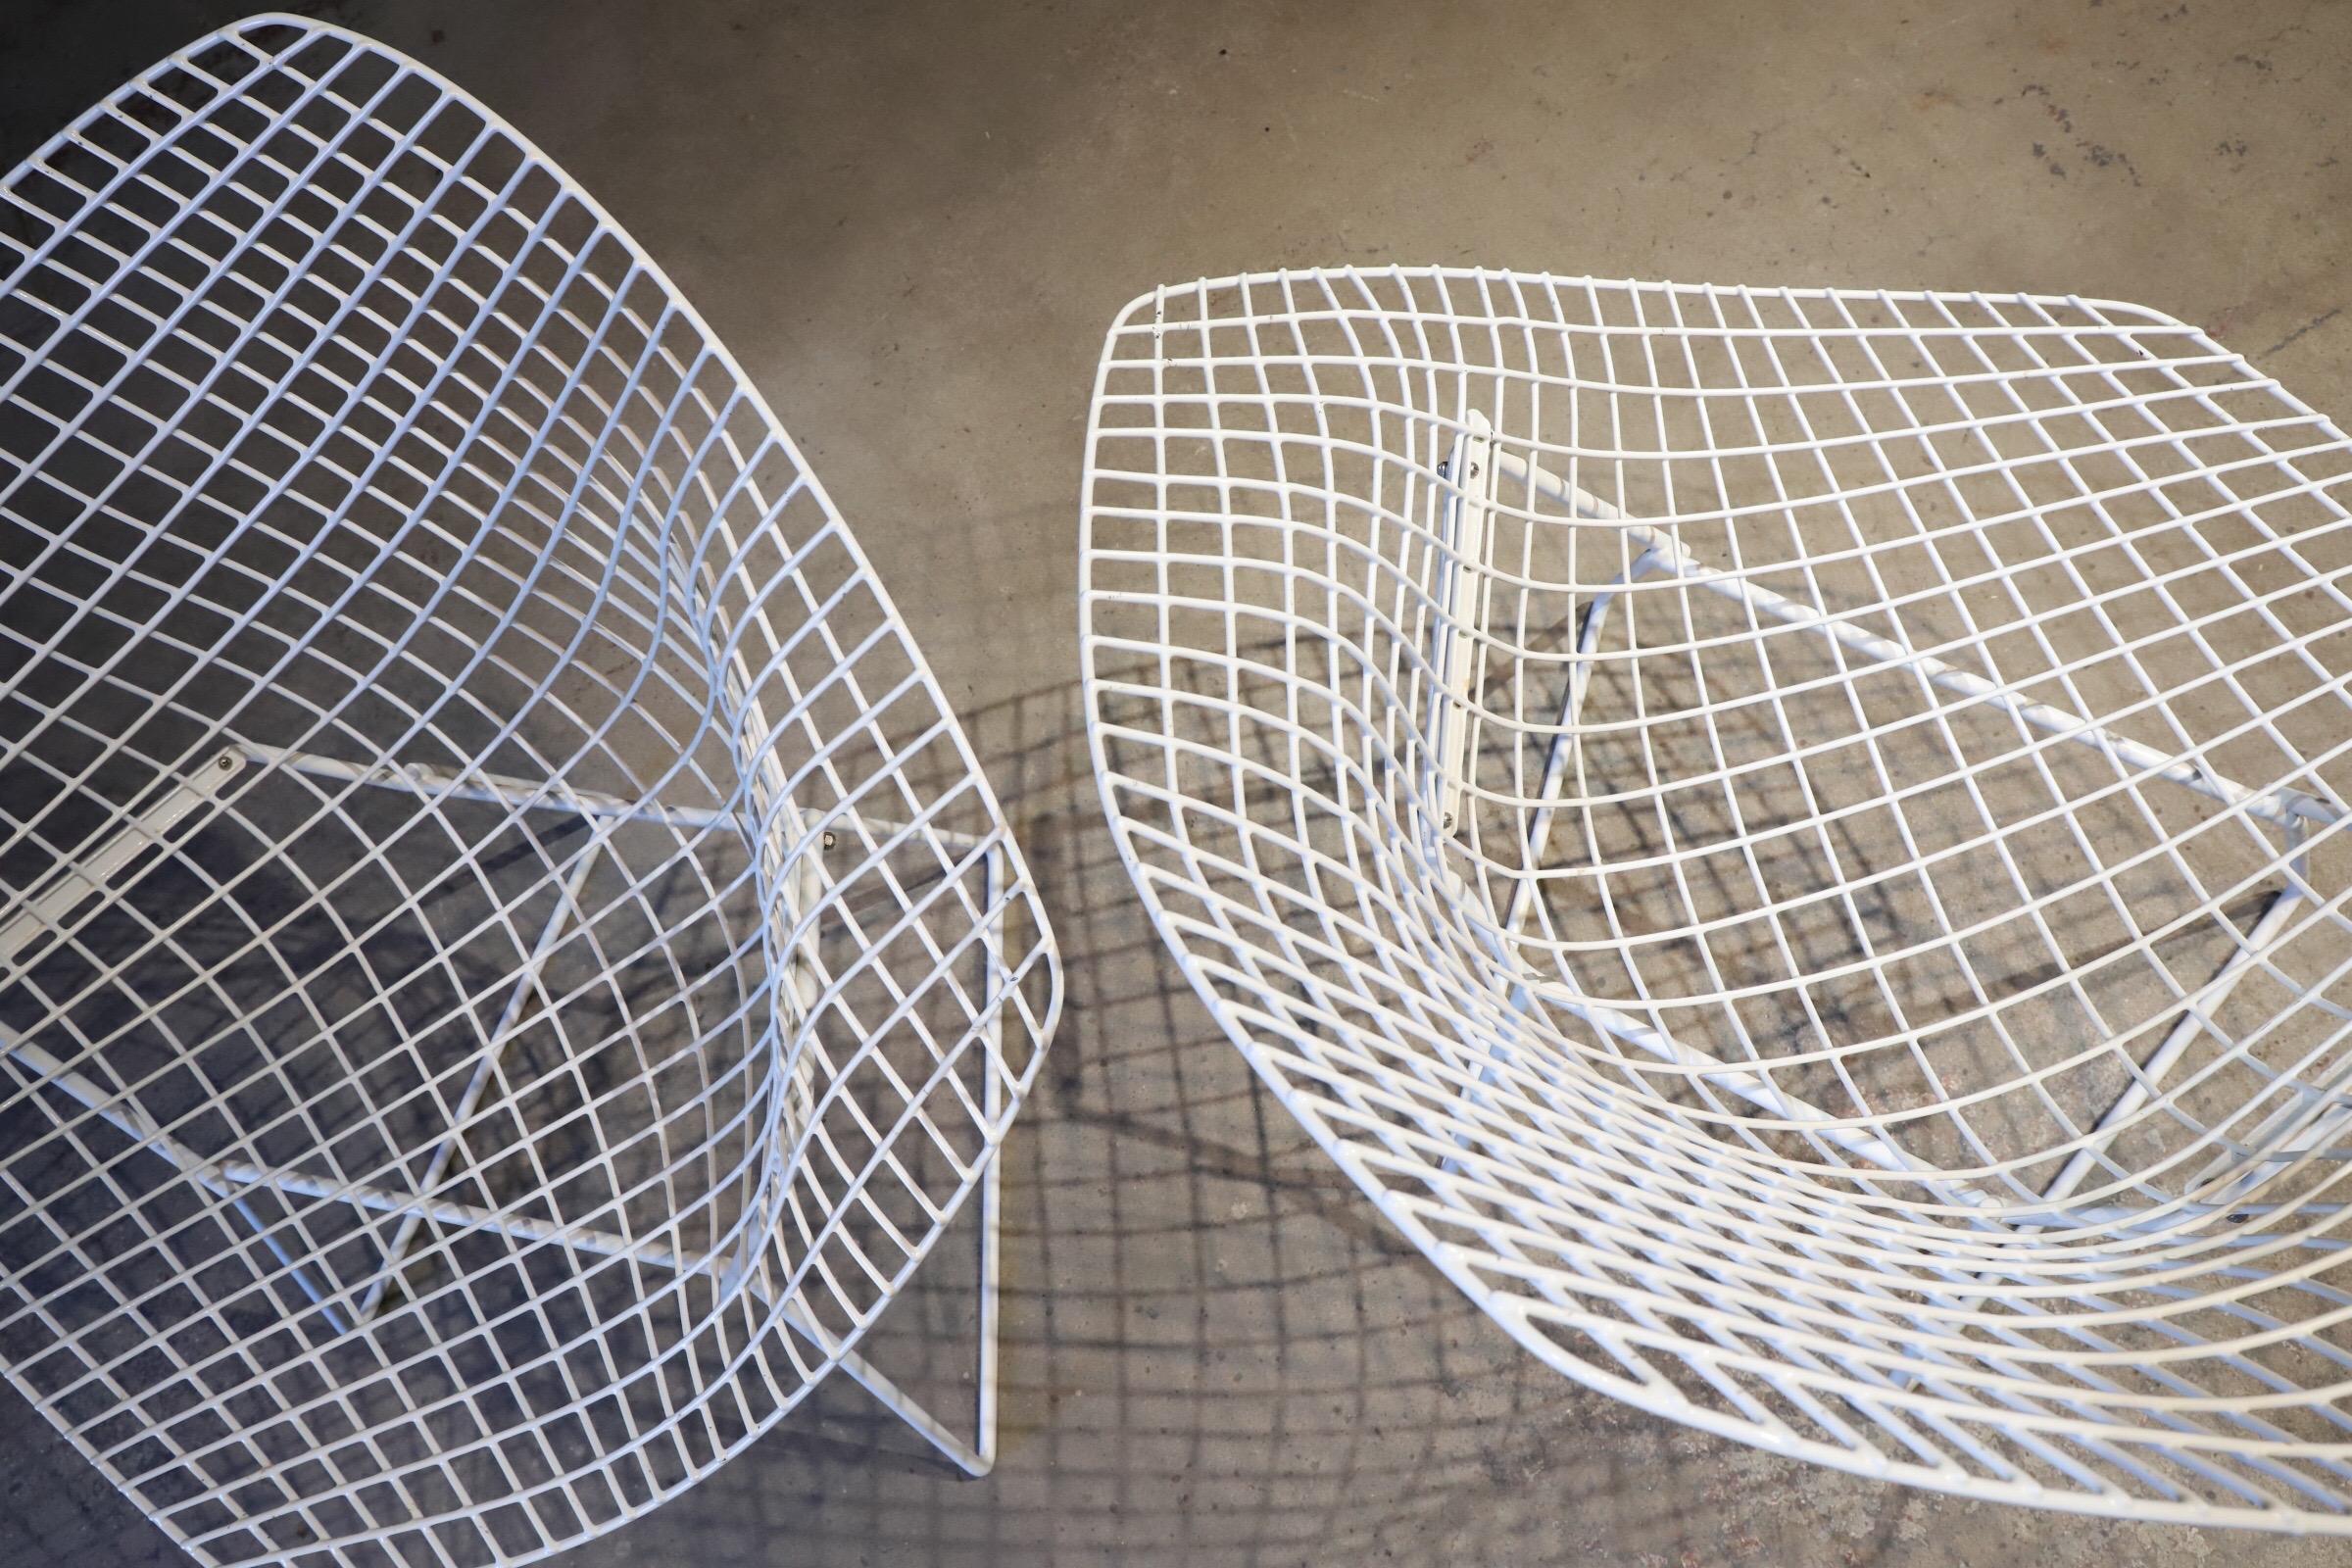 Pair of white diamond chairs by Harry Bertoia for Knoll. Original condition. Diamonds are timeless & always collectible. Photographed with Saarinen tulip stool for scale. Total of four chairs available (two shown in this listing).